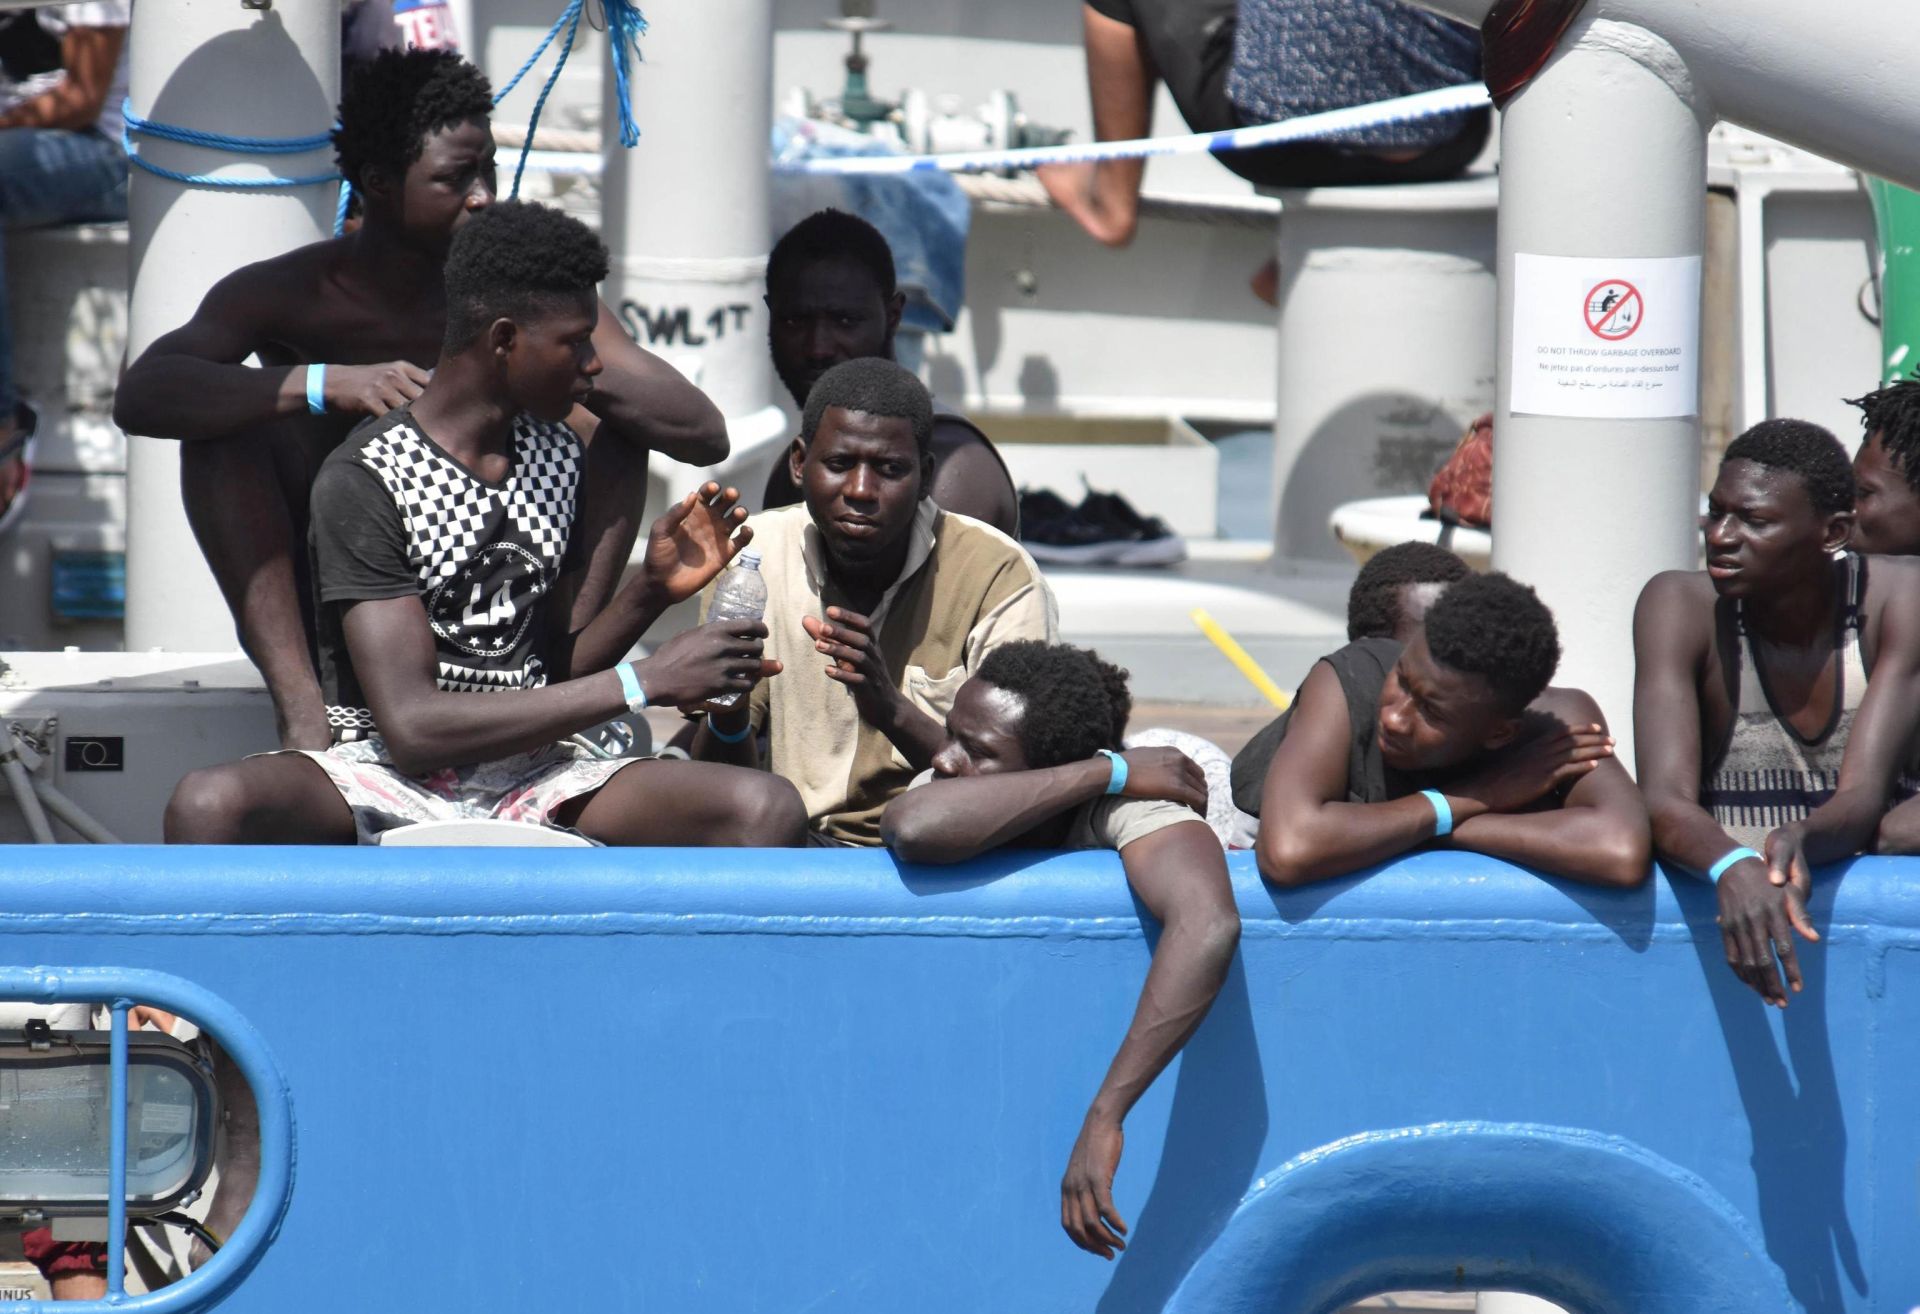 epa06059390 Some of the 650 migrants who were rescued by the Swedish ship Frontex in Mediterranean Sea off the Libyan coast, wait to disembark  in Catania, Italy, 01 July 2017. Nine migrants from the group were found dead. Italy has experienced a surge in refugee and migrant arrivals in recent months, and media outlets report that the Italian government is considering blocking boats carrying migrants from landing at its ports.  EPA/ORIETTA SCARDINO